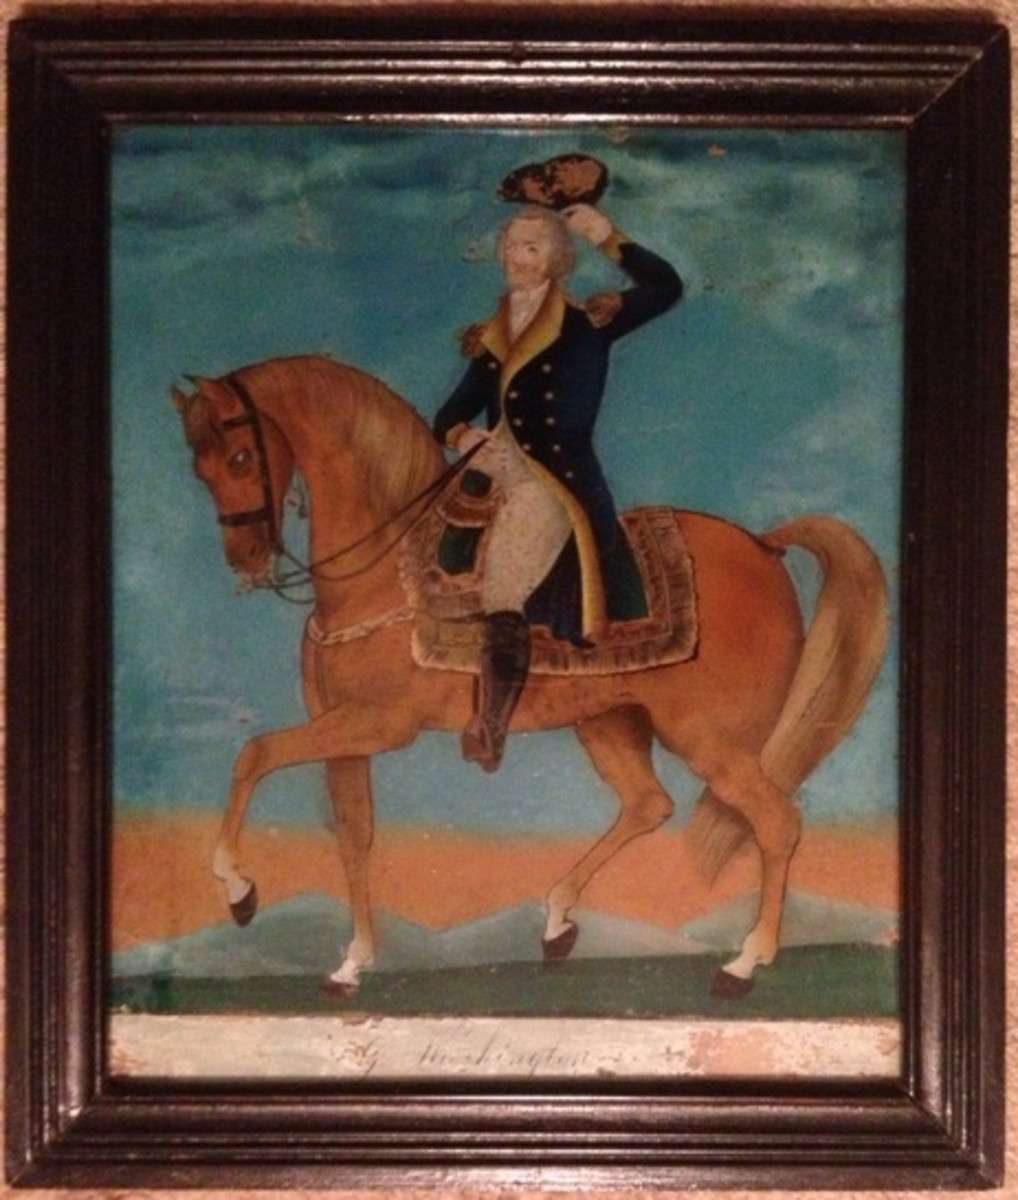 A circa 1825 reverse-painted glass image of George Washington in original frame.